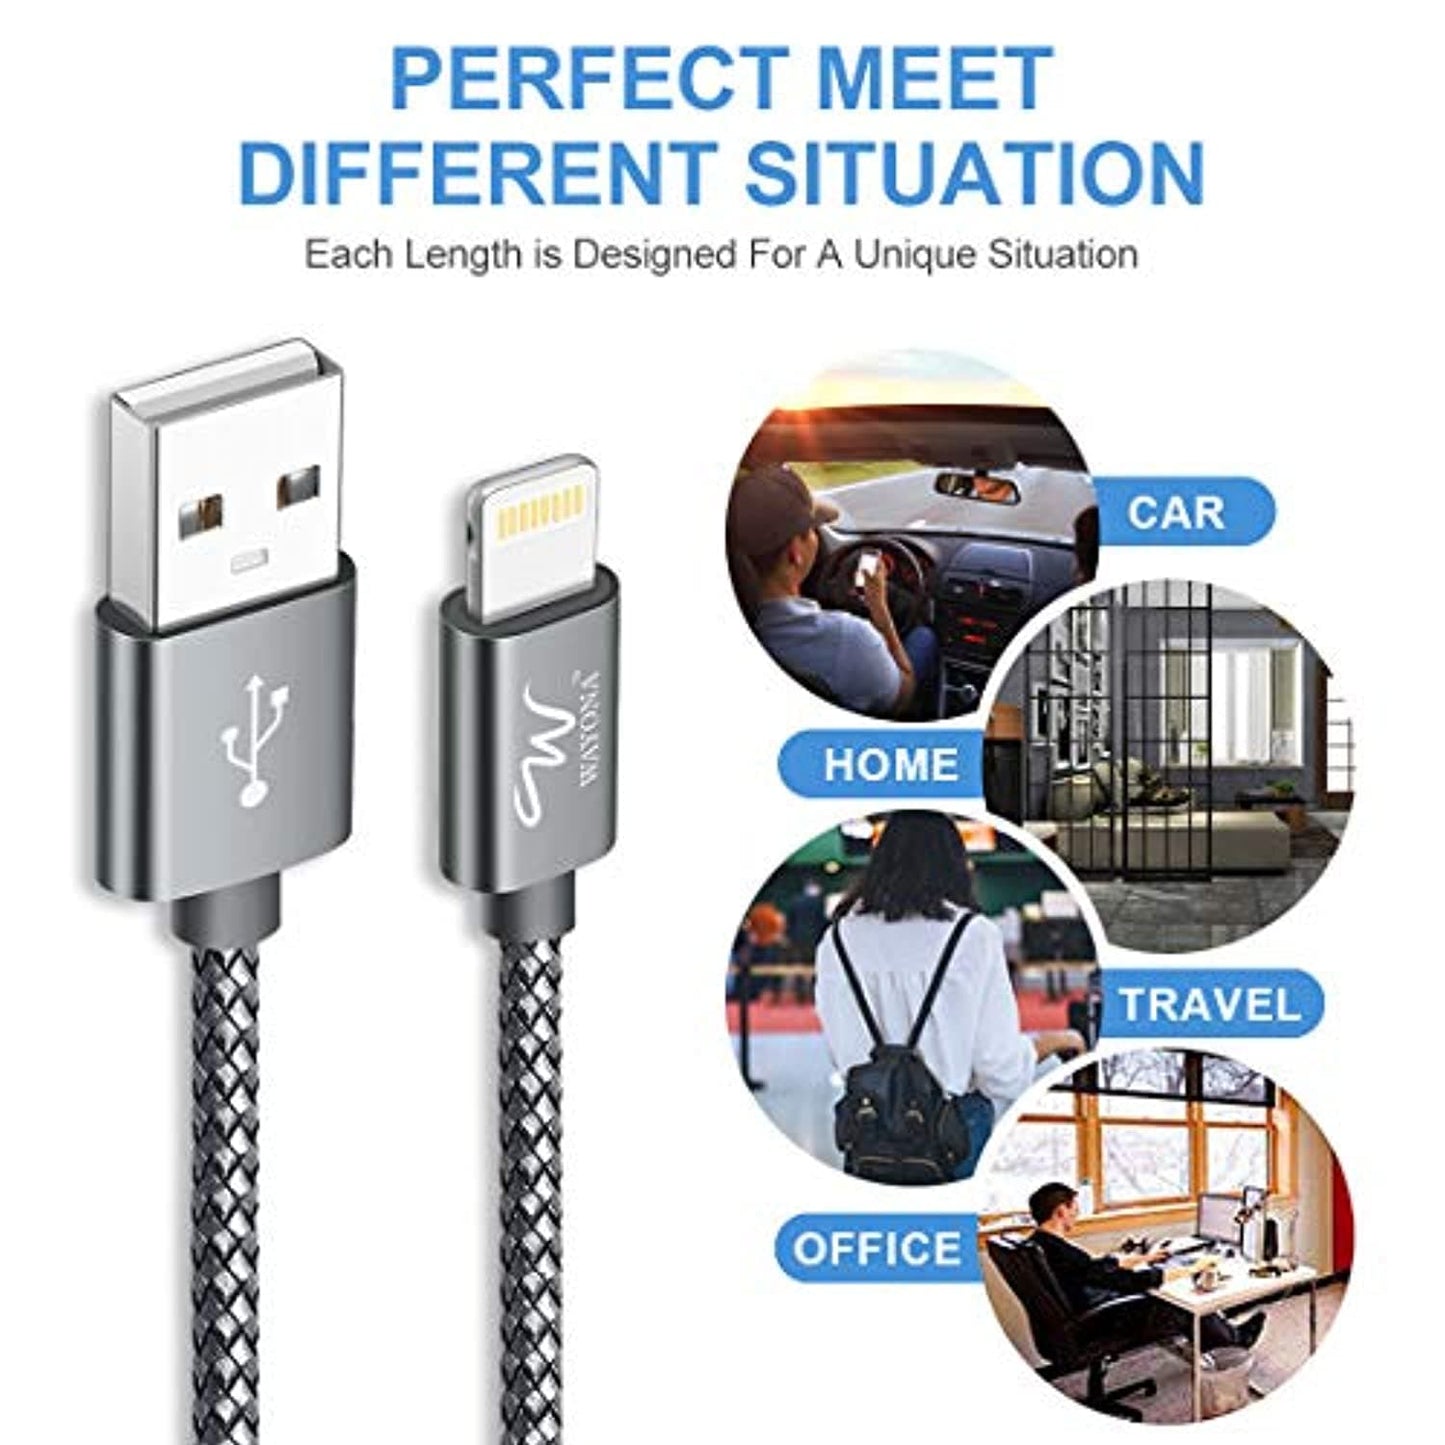 Nylon Braided USB Data Sync & Charging Cable for iPhones, iPad Air, iPad Mini, iPod Nano and iPod Touch